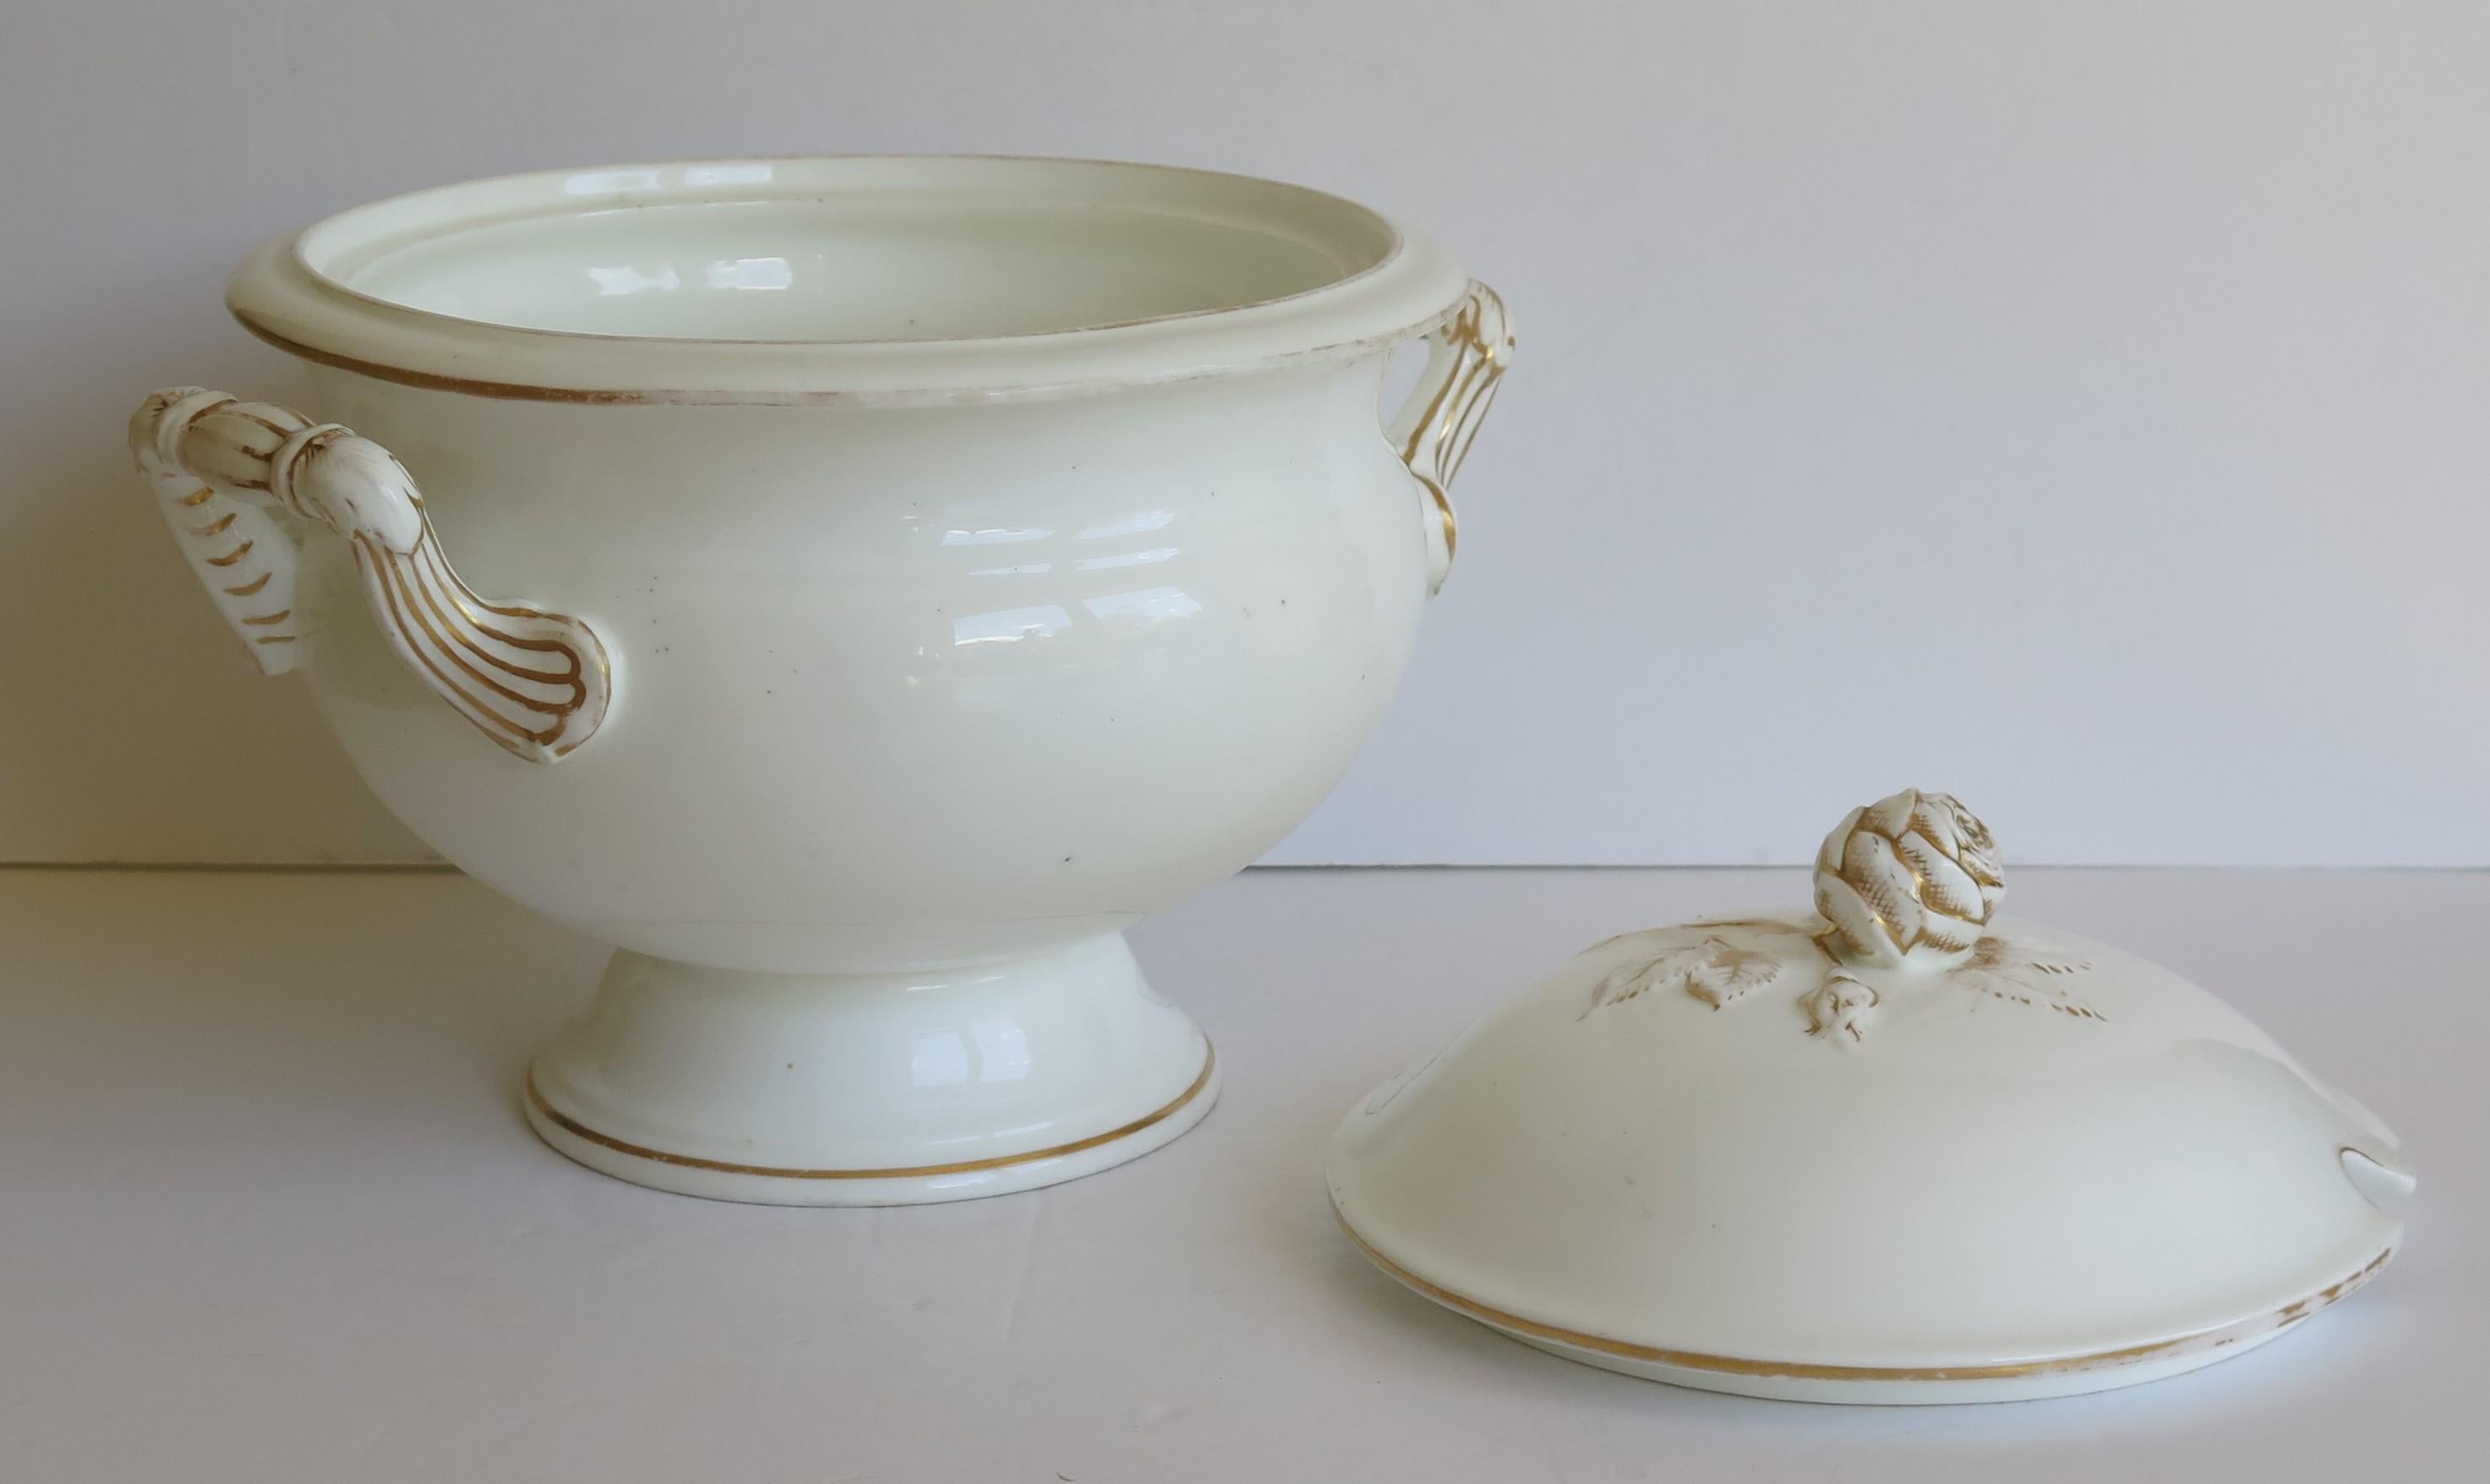 Large 19th Century Porcelain Tureen Gilded Moulded Handles & Rose Knop to Lid For Sale 4